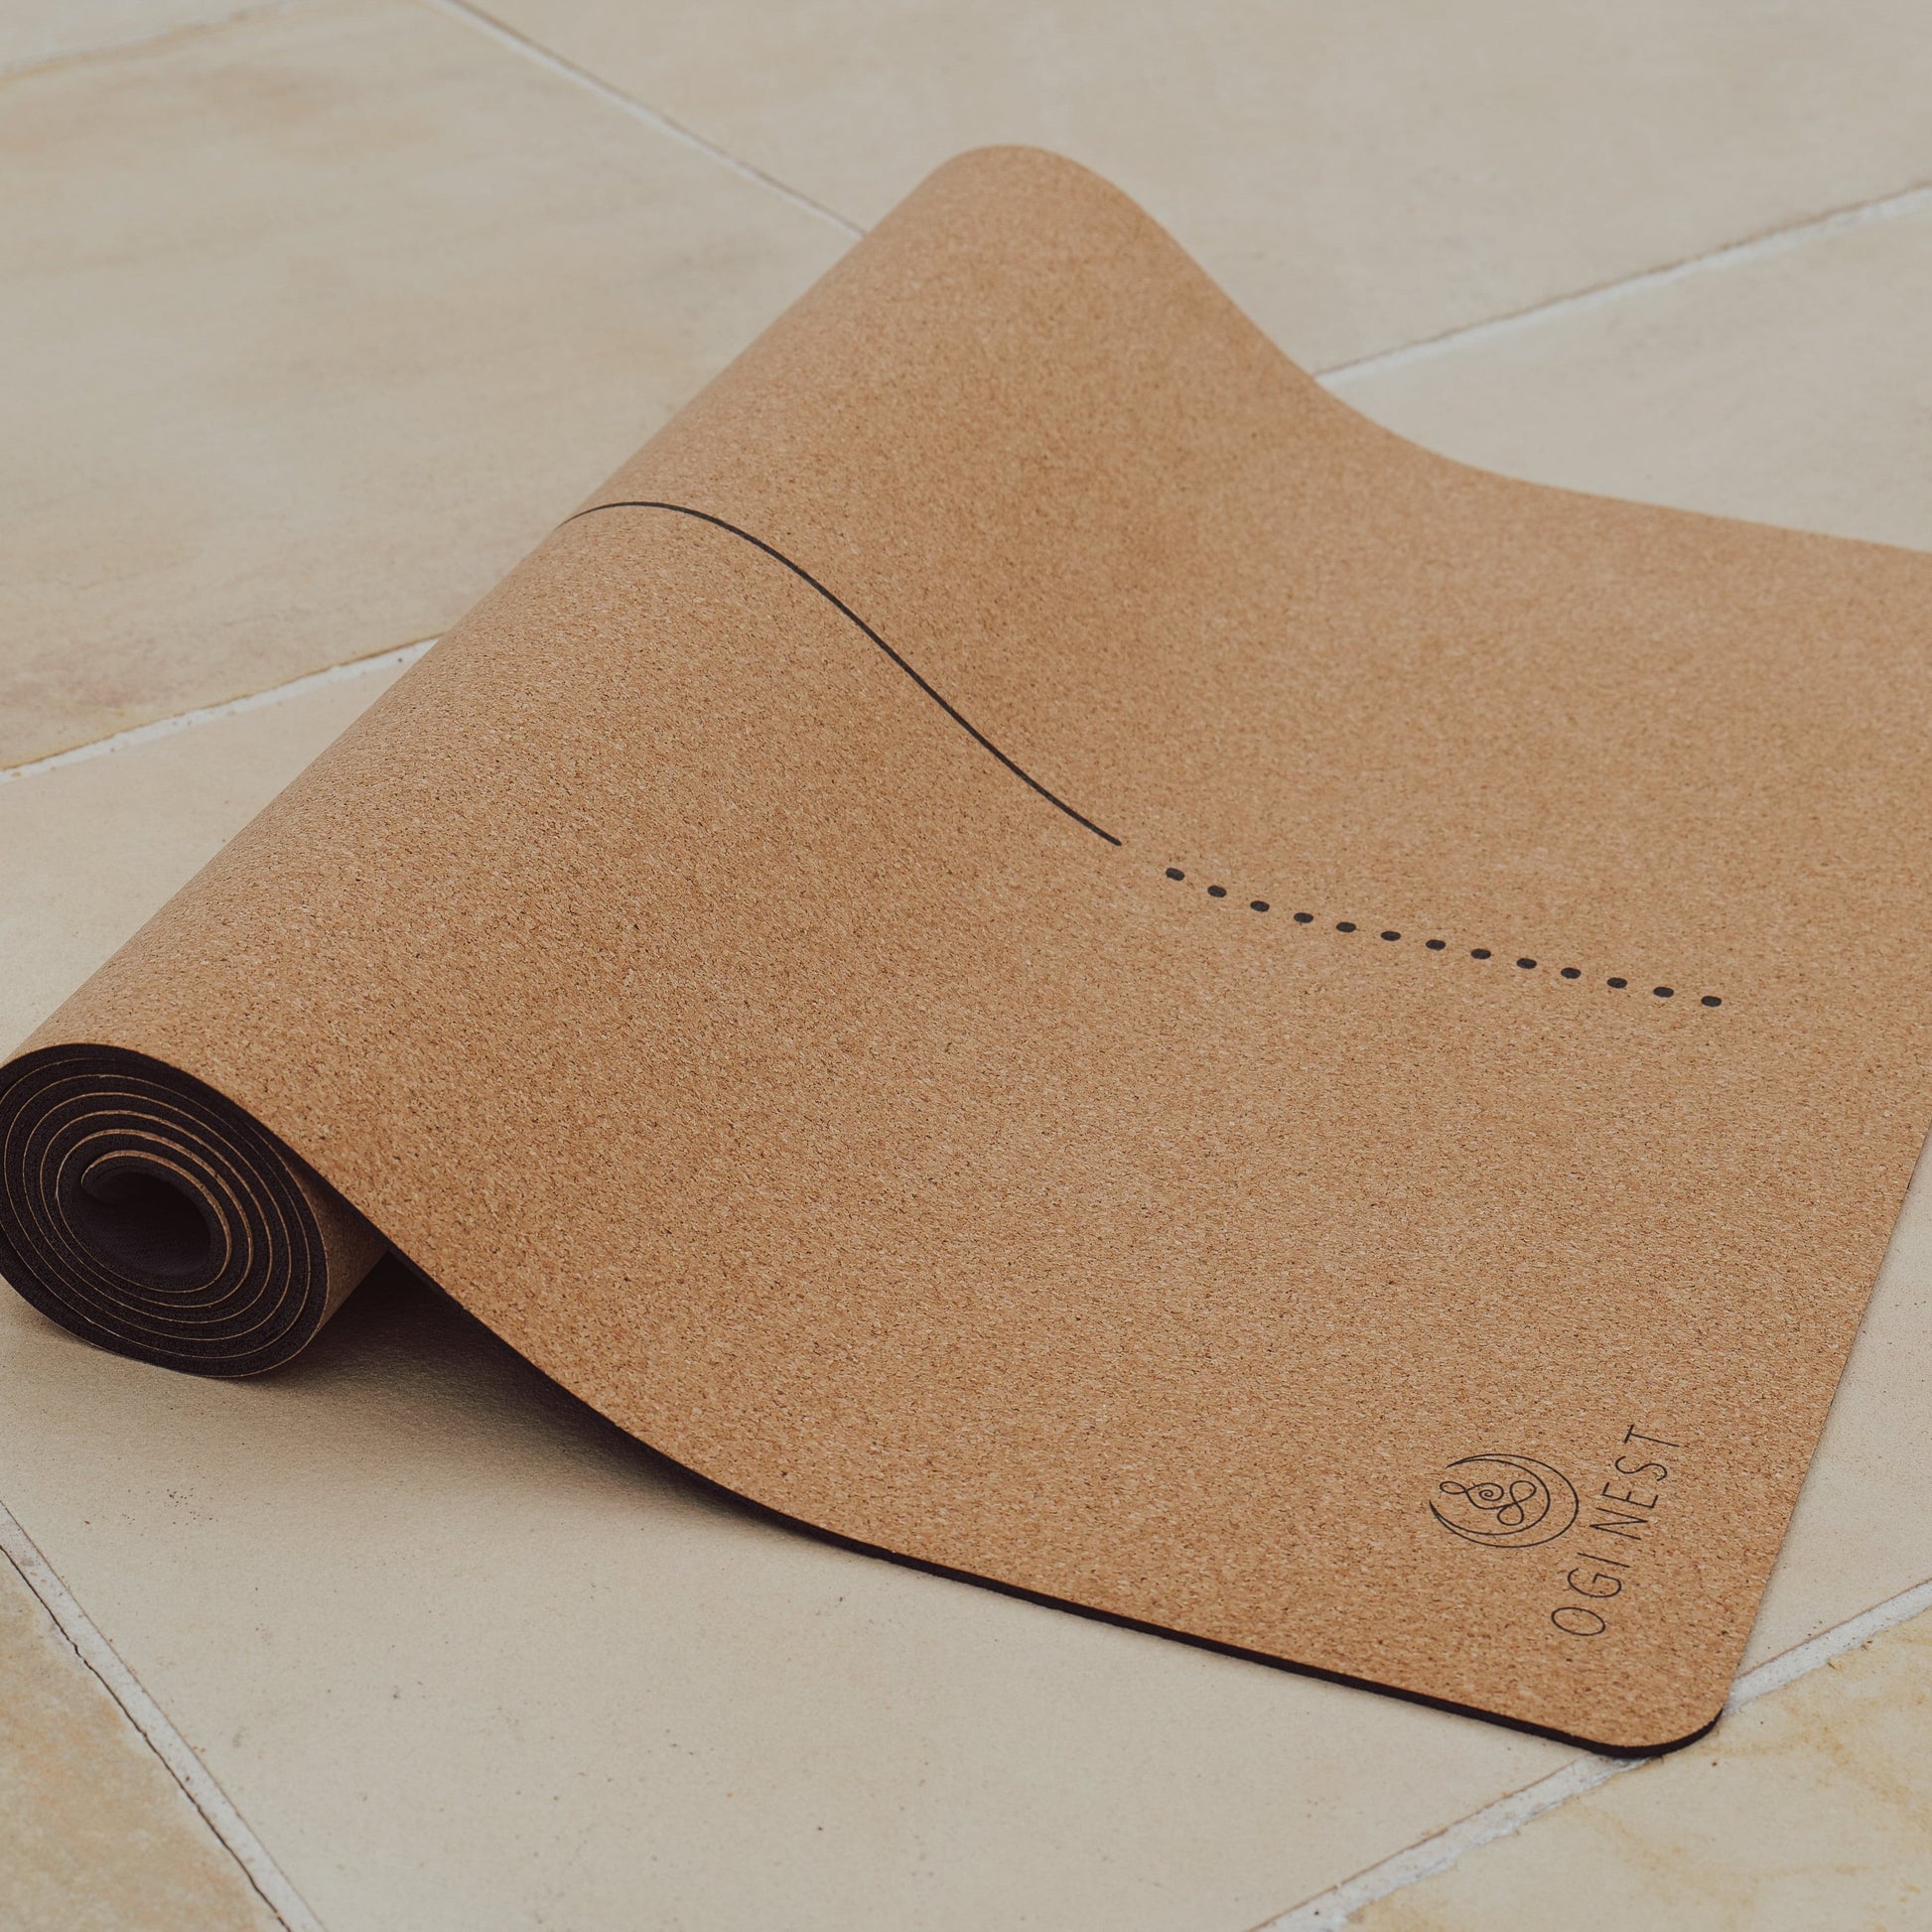 Unalome lotus cork and natural rubber yoga mat partially rolled up.